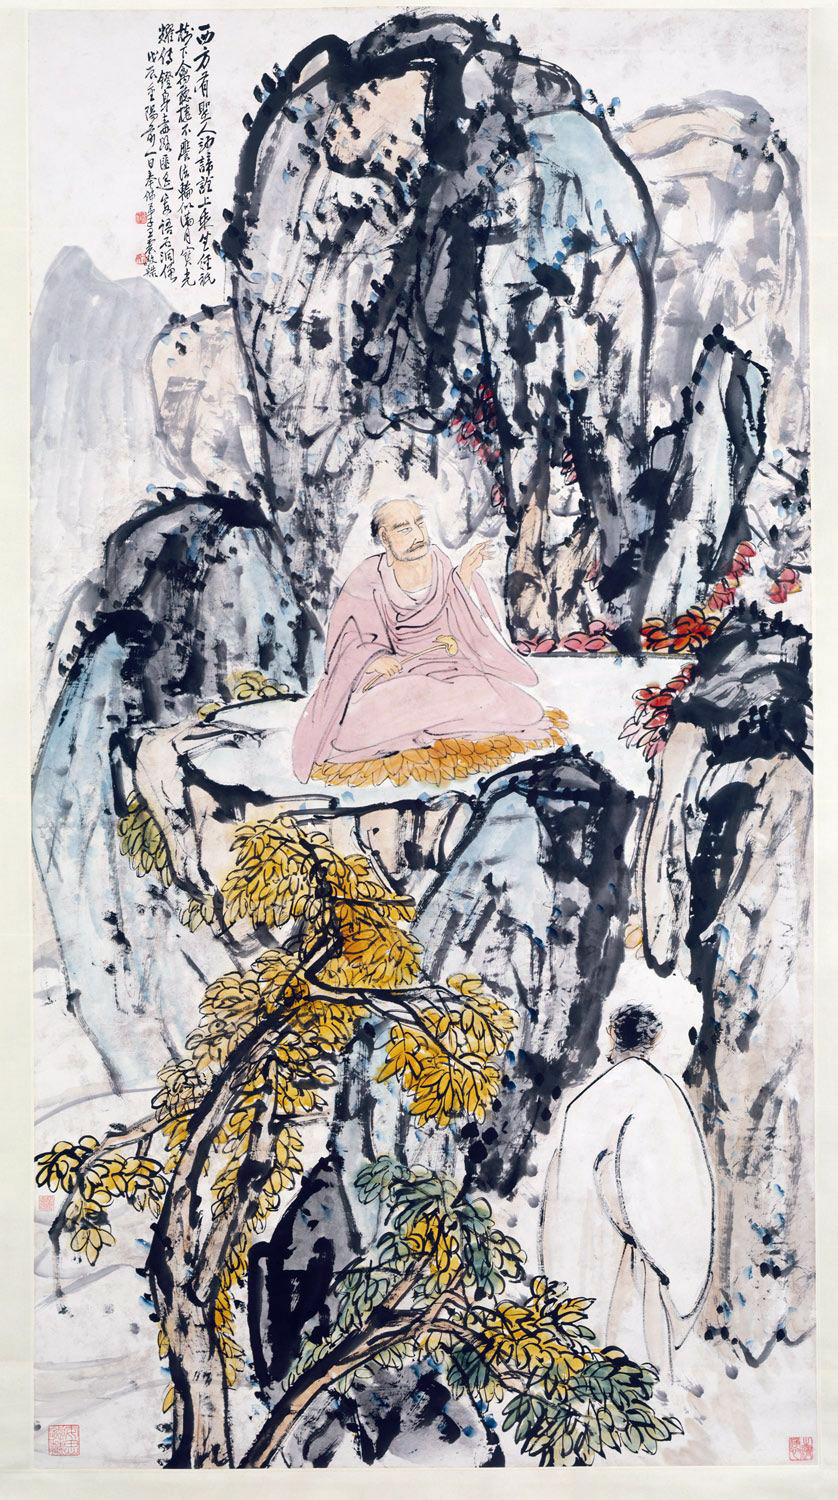 Wang Zhen, Buddhist Sage, dated October 20 1928, hanging scroll, ink and color on paper, 199.4 x 93.7 cm (The Metropolitan Museum of Art)